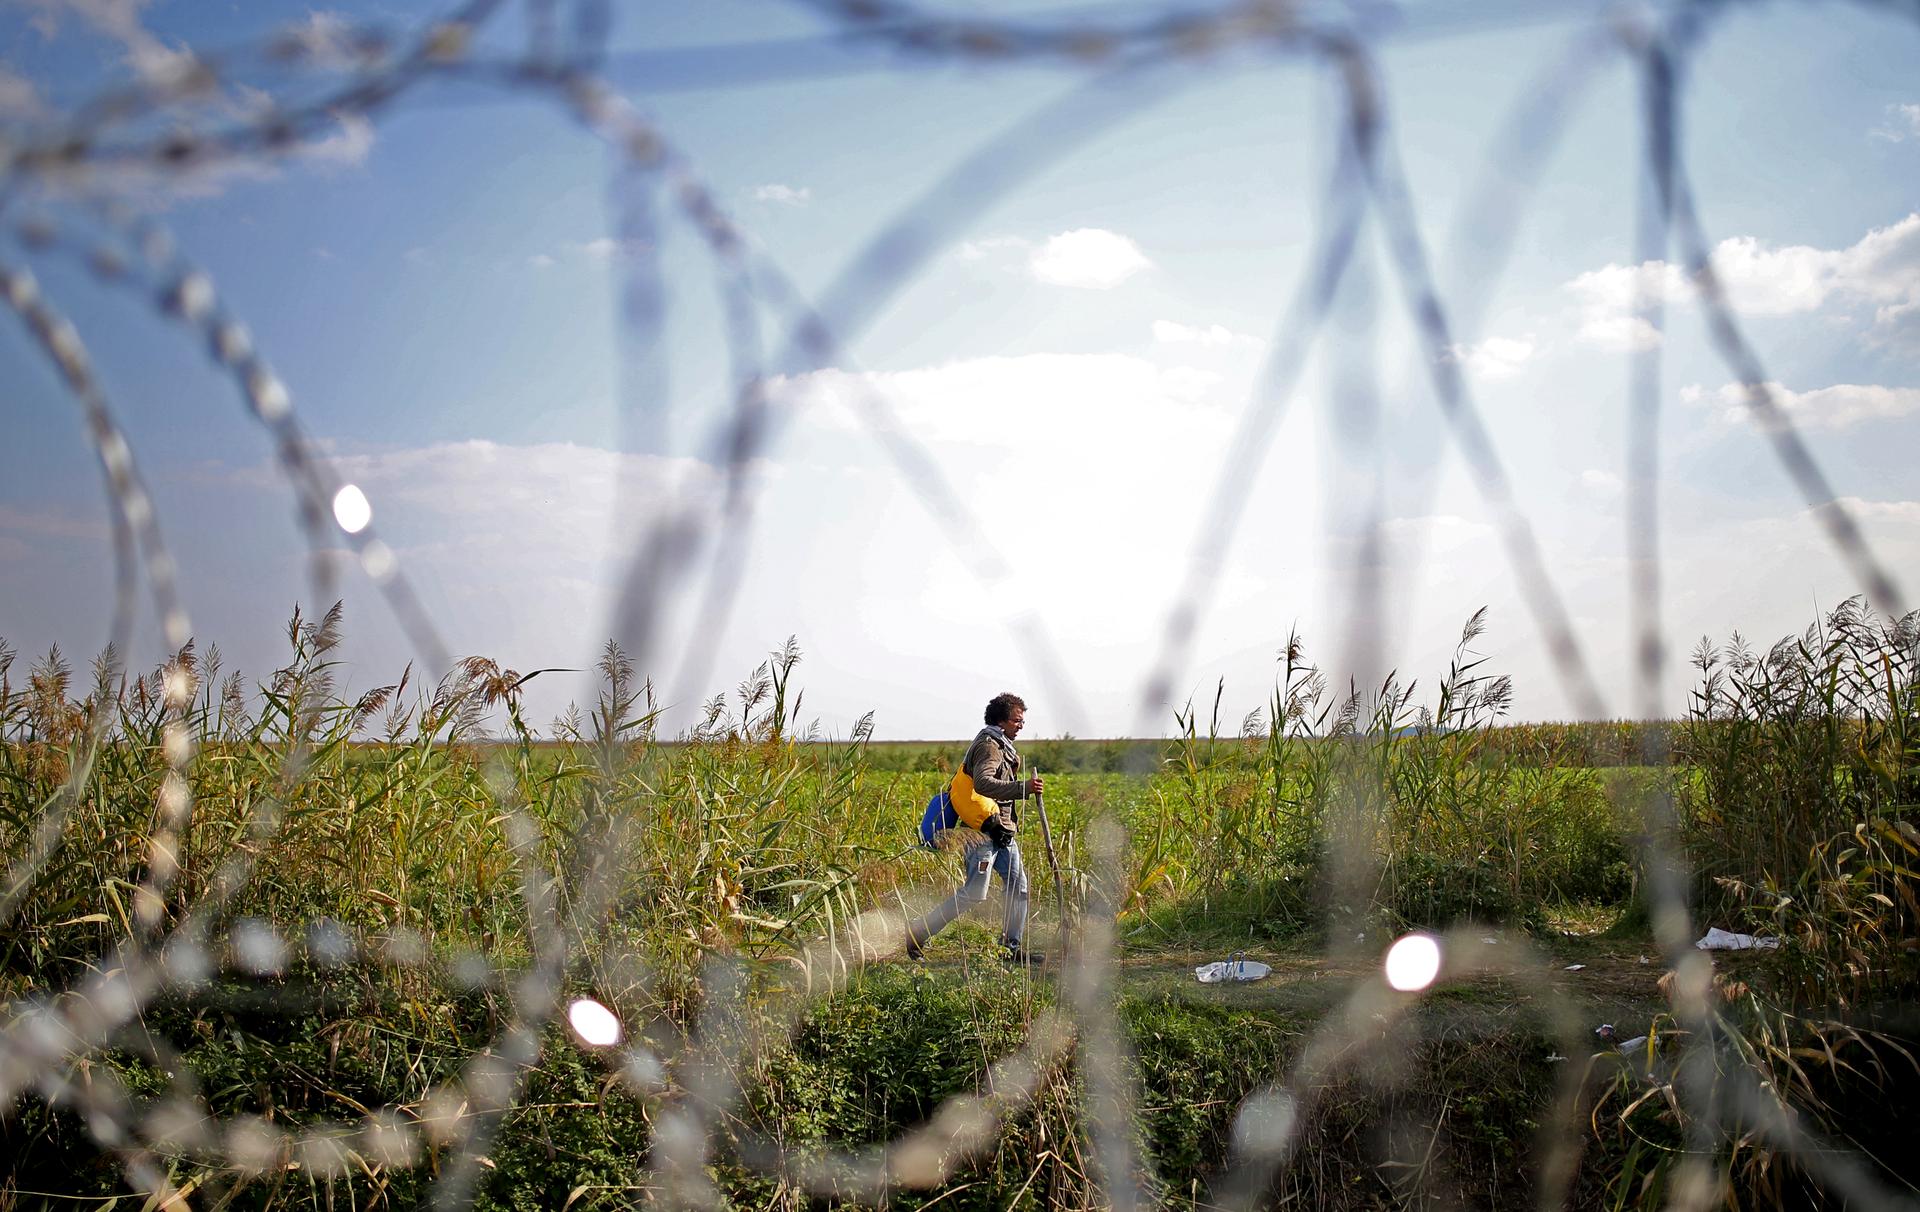 A migrant is seen through the fence as he walks before crossing the into the country from Serbia at the border near Roszke, Hungary September 13, 2015. 